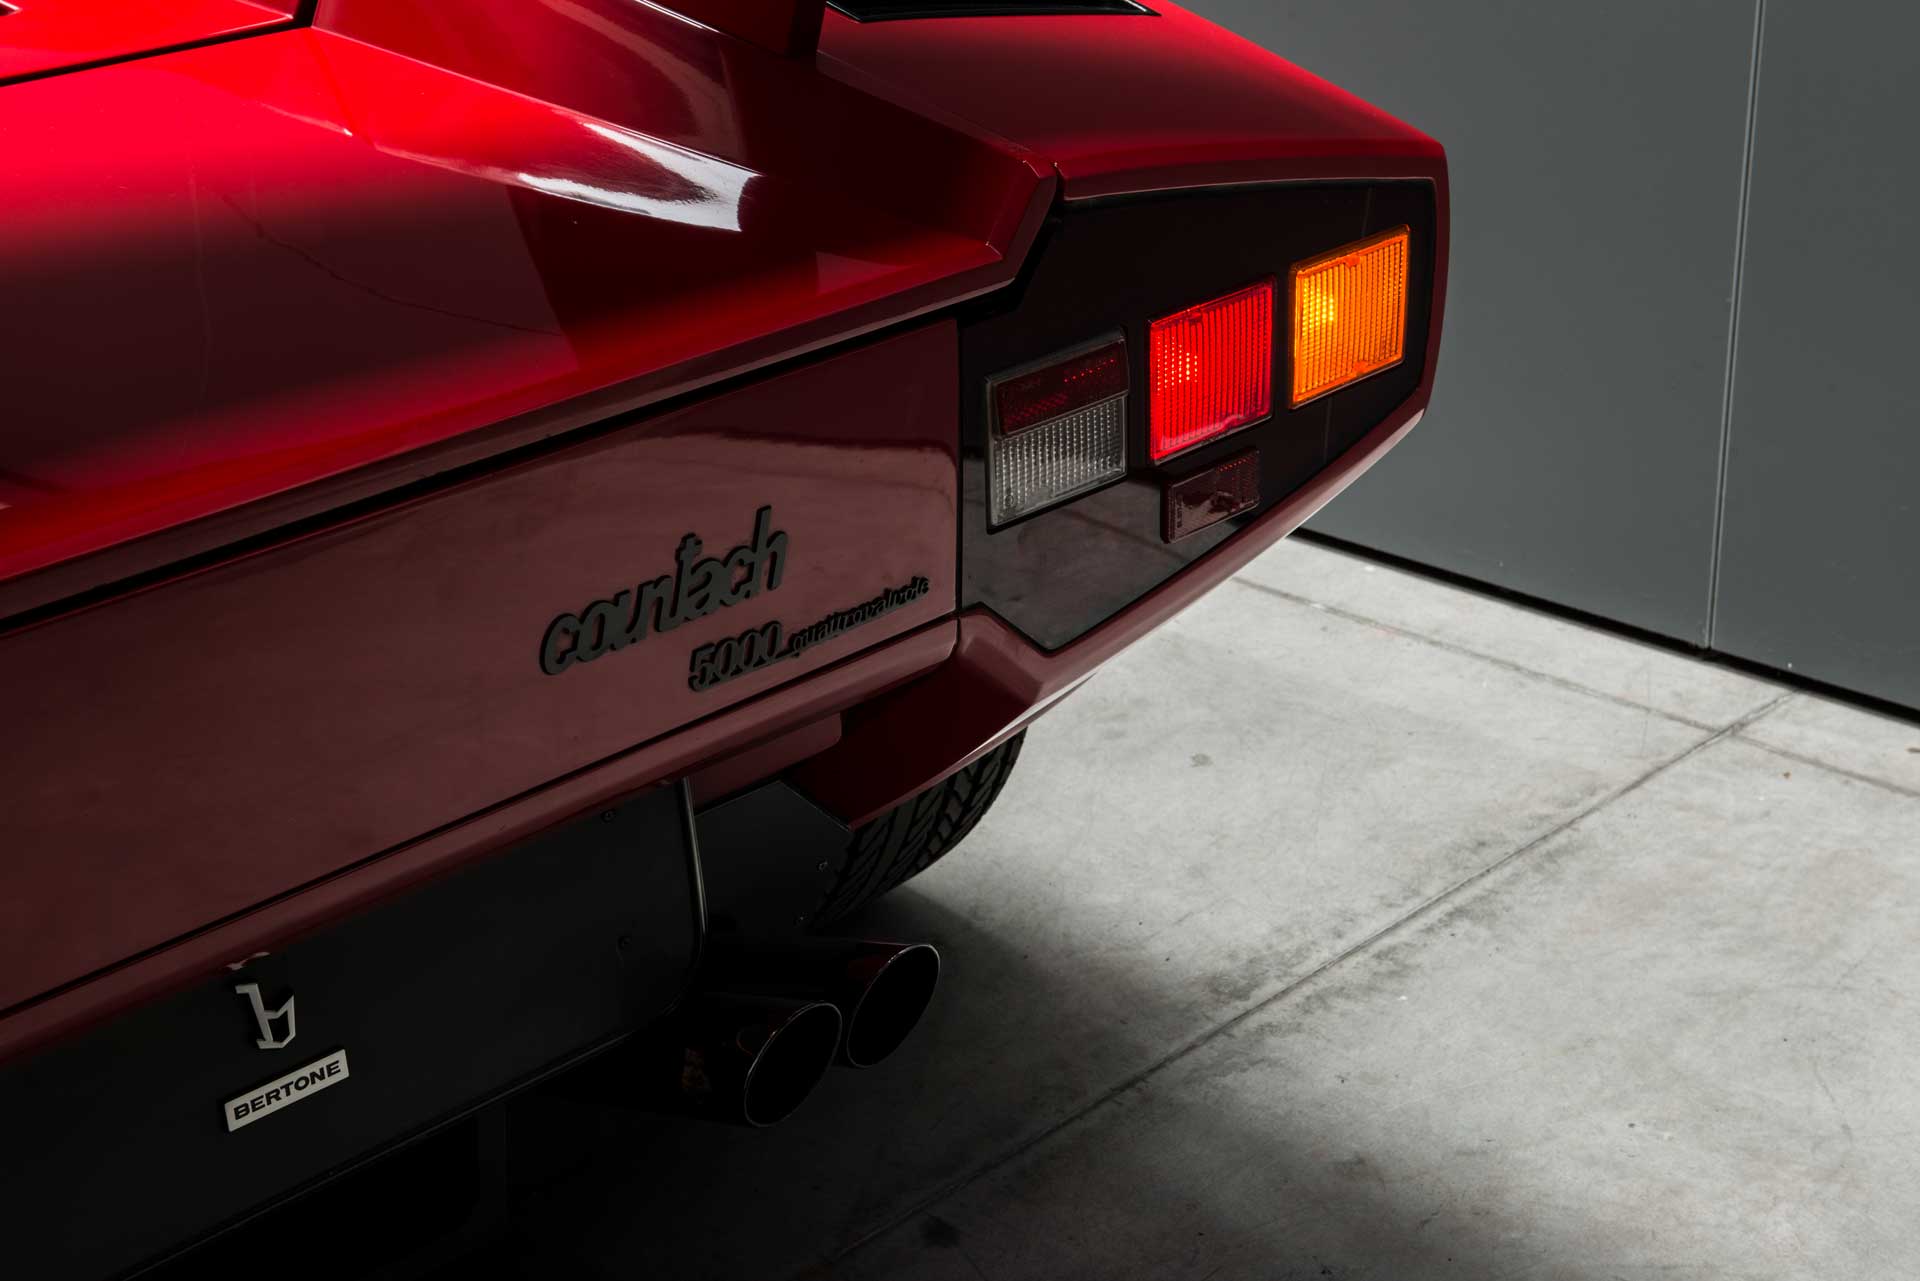 The badge says it all: that this Countach is the version with the 5-litre engine and four valves per cylinder